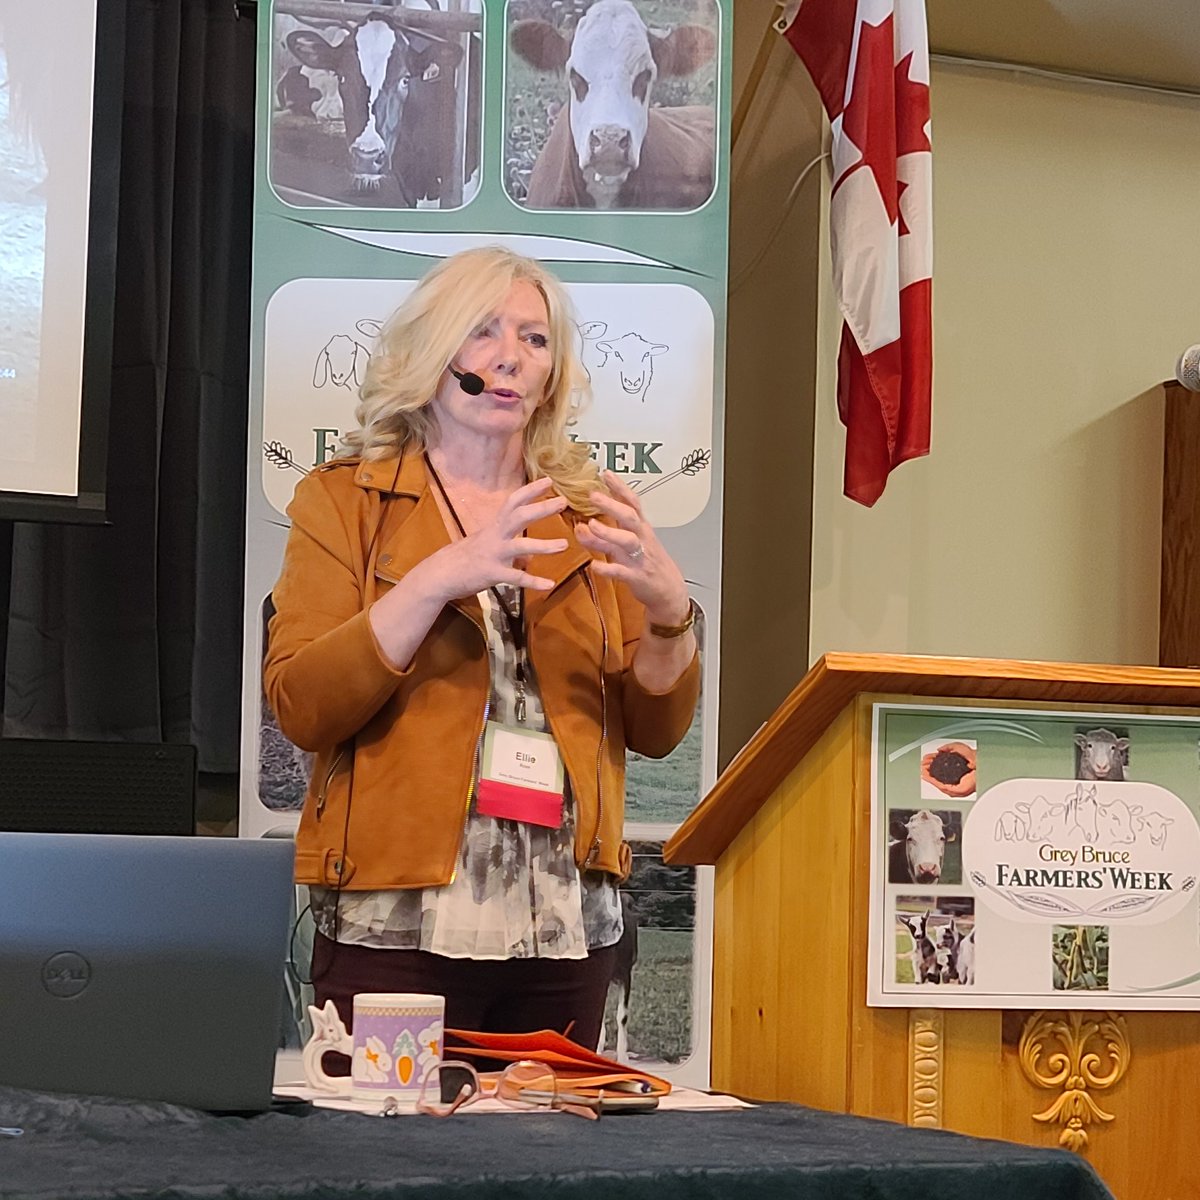 Ellie Ross of Circle 8 Ranch presentation'How to Use Positive Reinforcement in Training Programs to Overcome Fears' Day 5 Horse Day
#GBFW23 #Horse #Equine #AgConference #OntarioFarmer 
#OntAg #FarmConference